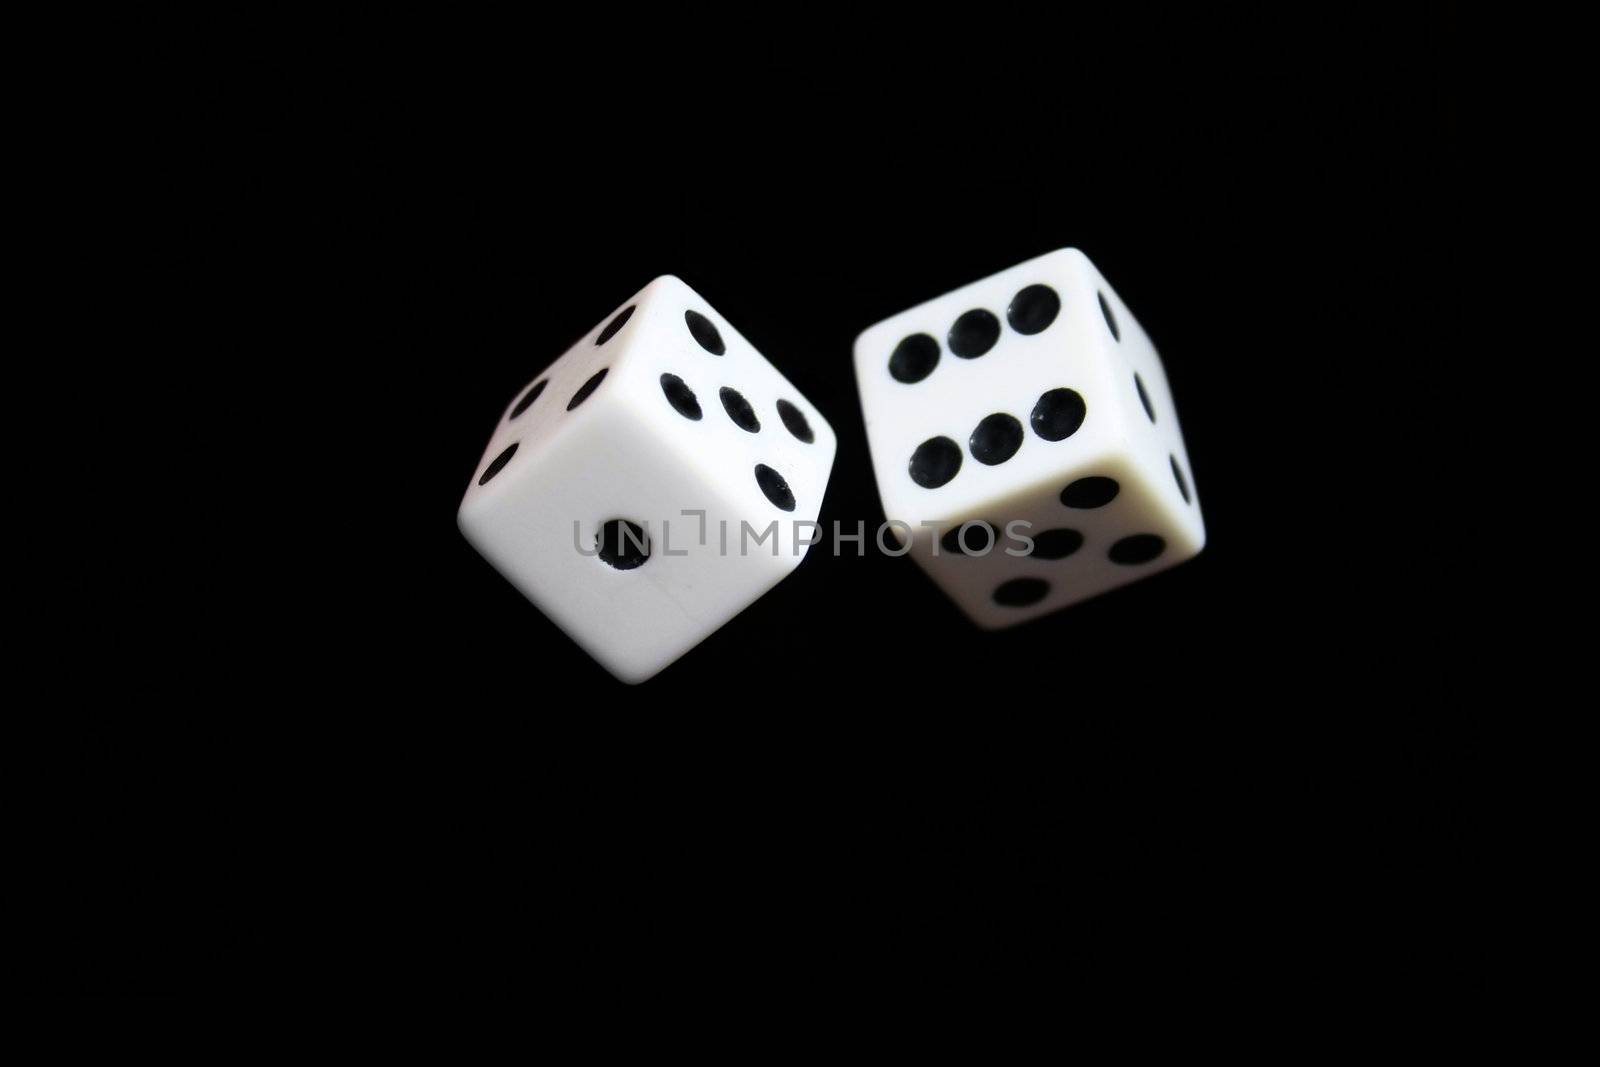 Dice appearing to be thrown in the air